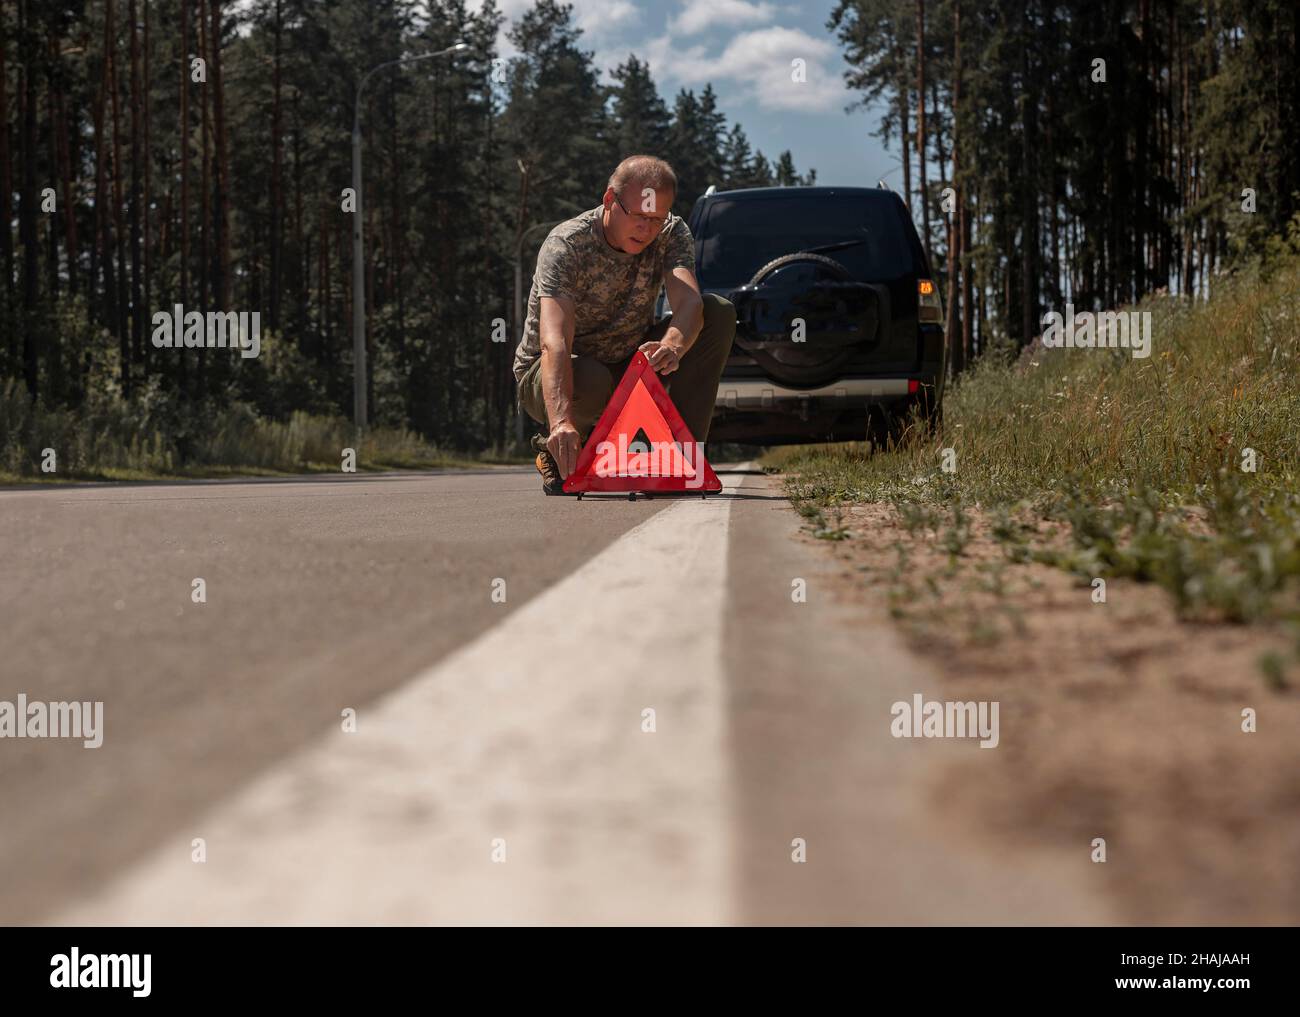 Driver man putting red triangle caution and warning sign on road near broken car. Stock Photo